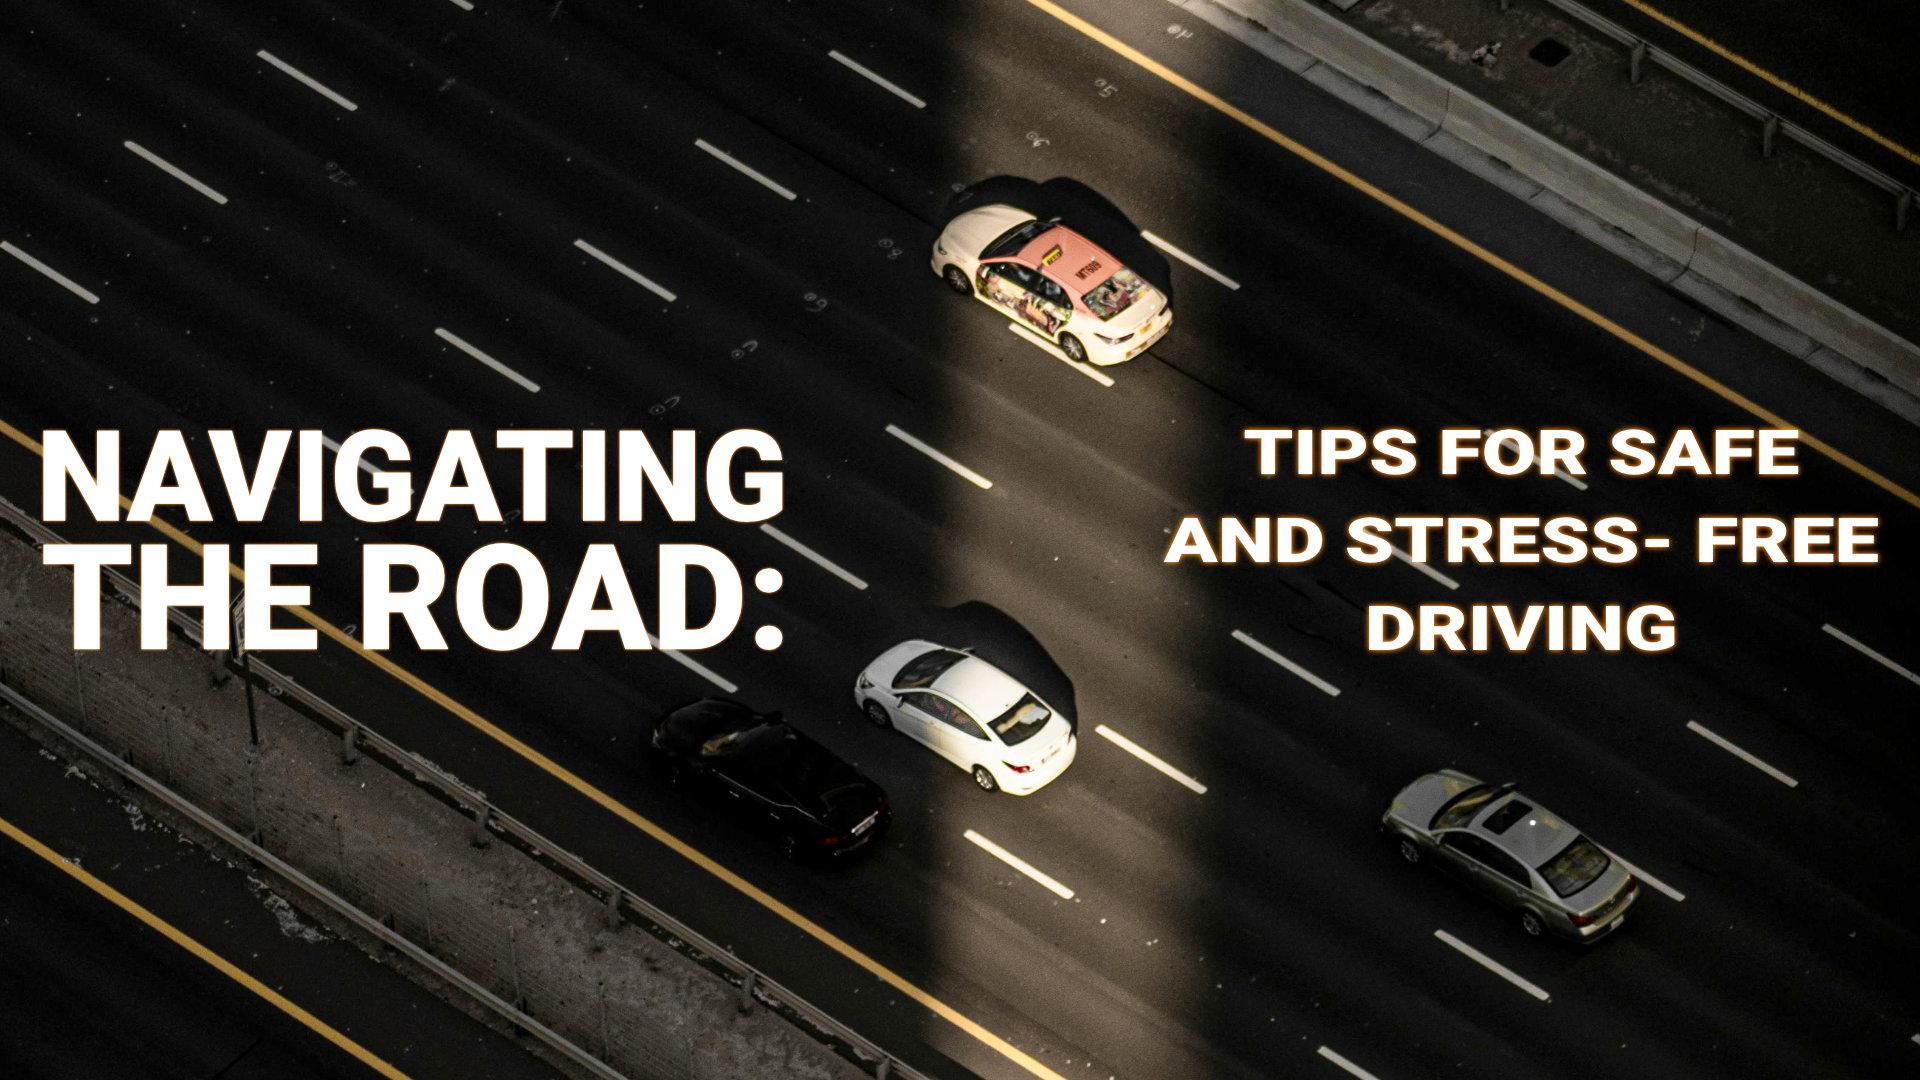 Navigating the Road: Tips for Safe and Stress-Free Driving